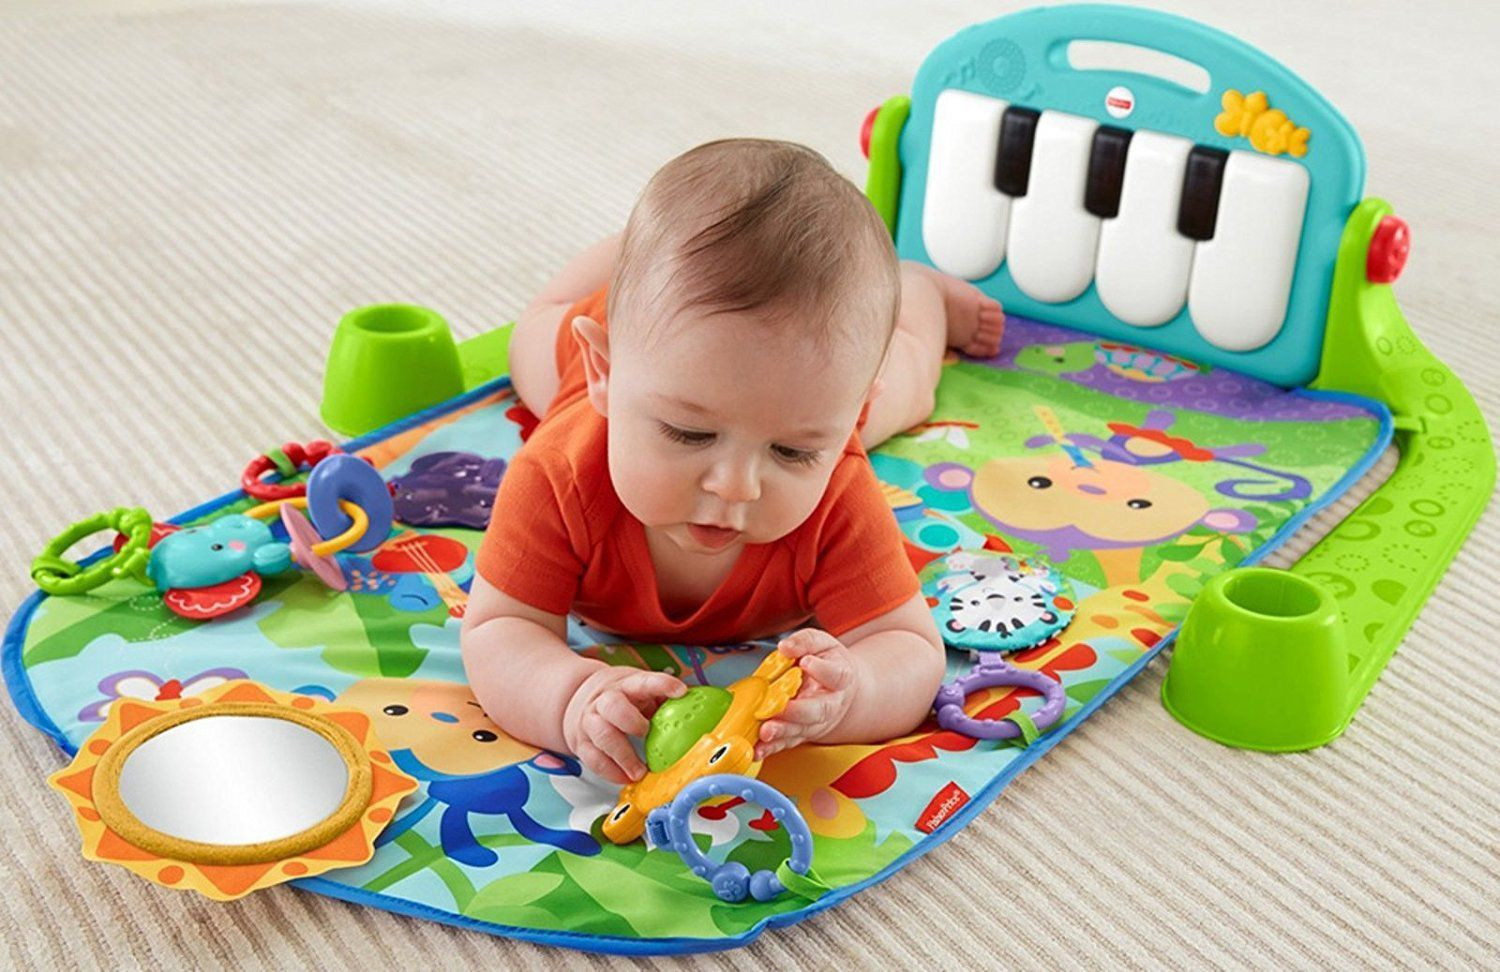 Best Gift For Baby
 The 9 Best Baby Gifts of 2019